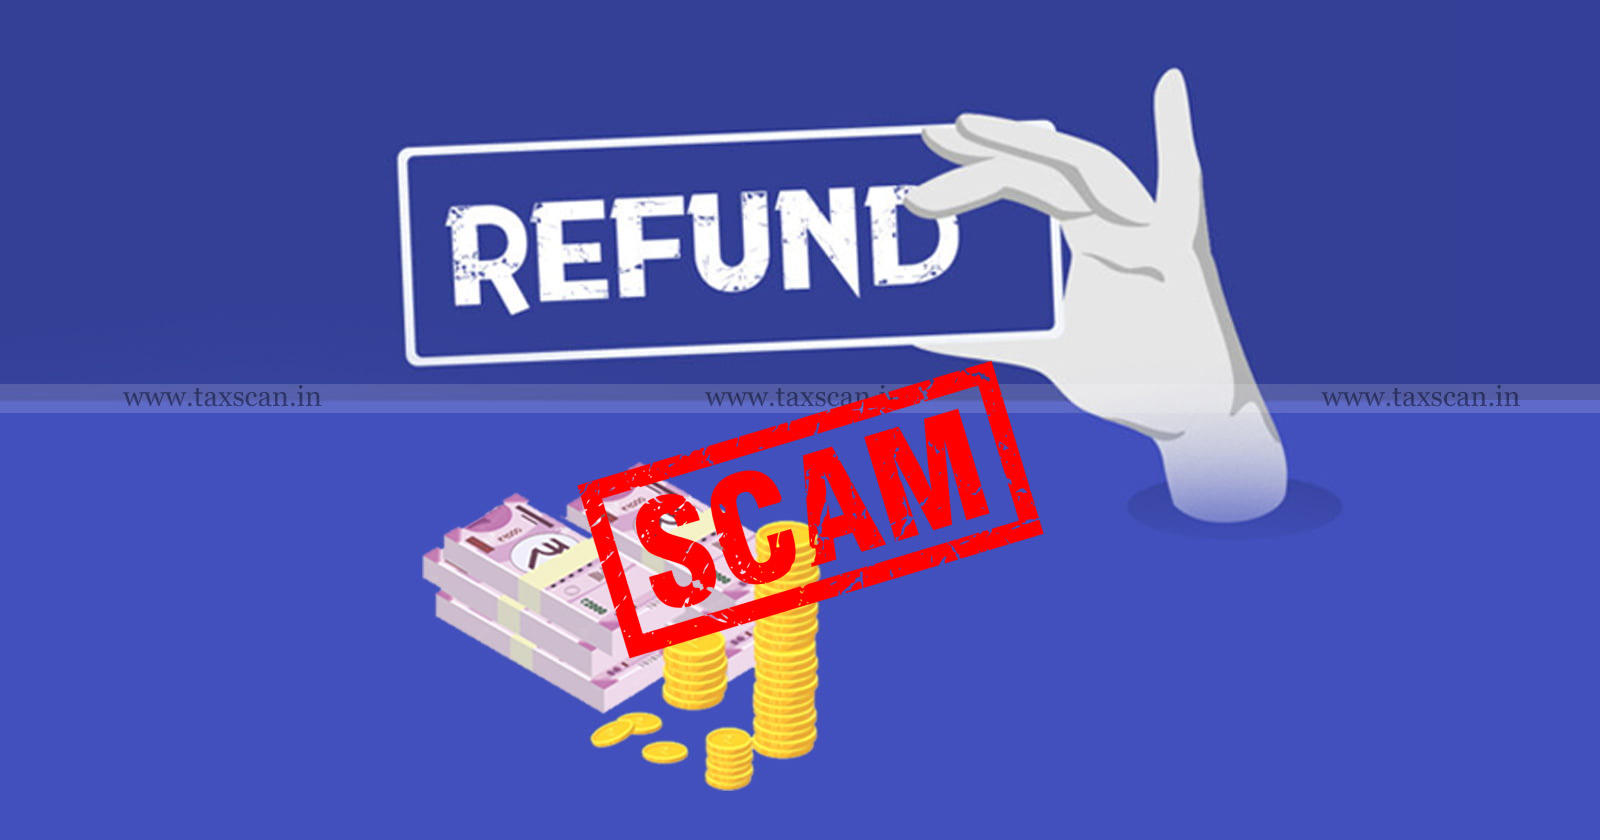 Refund Scam - Govt warns Taxpayers - Fake Income Tax Refund Message - Could be a Scam - TAXSCAN